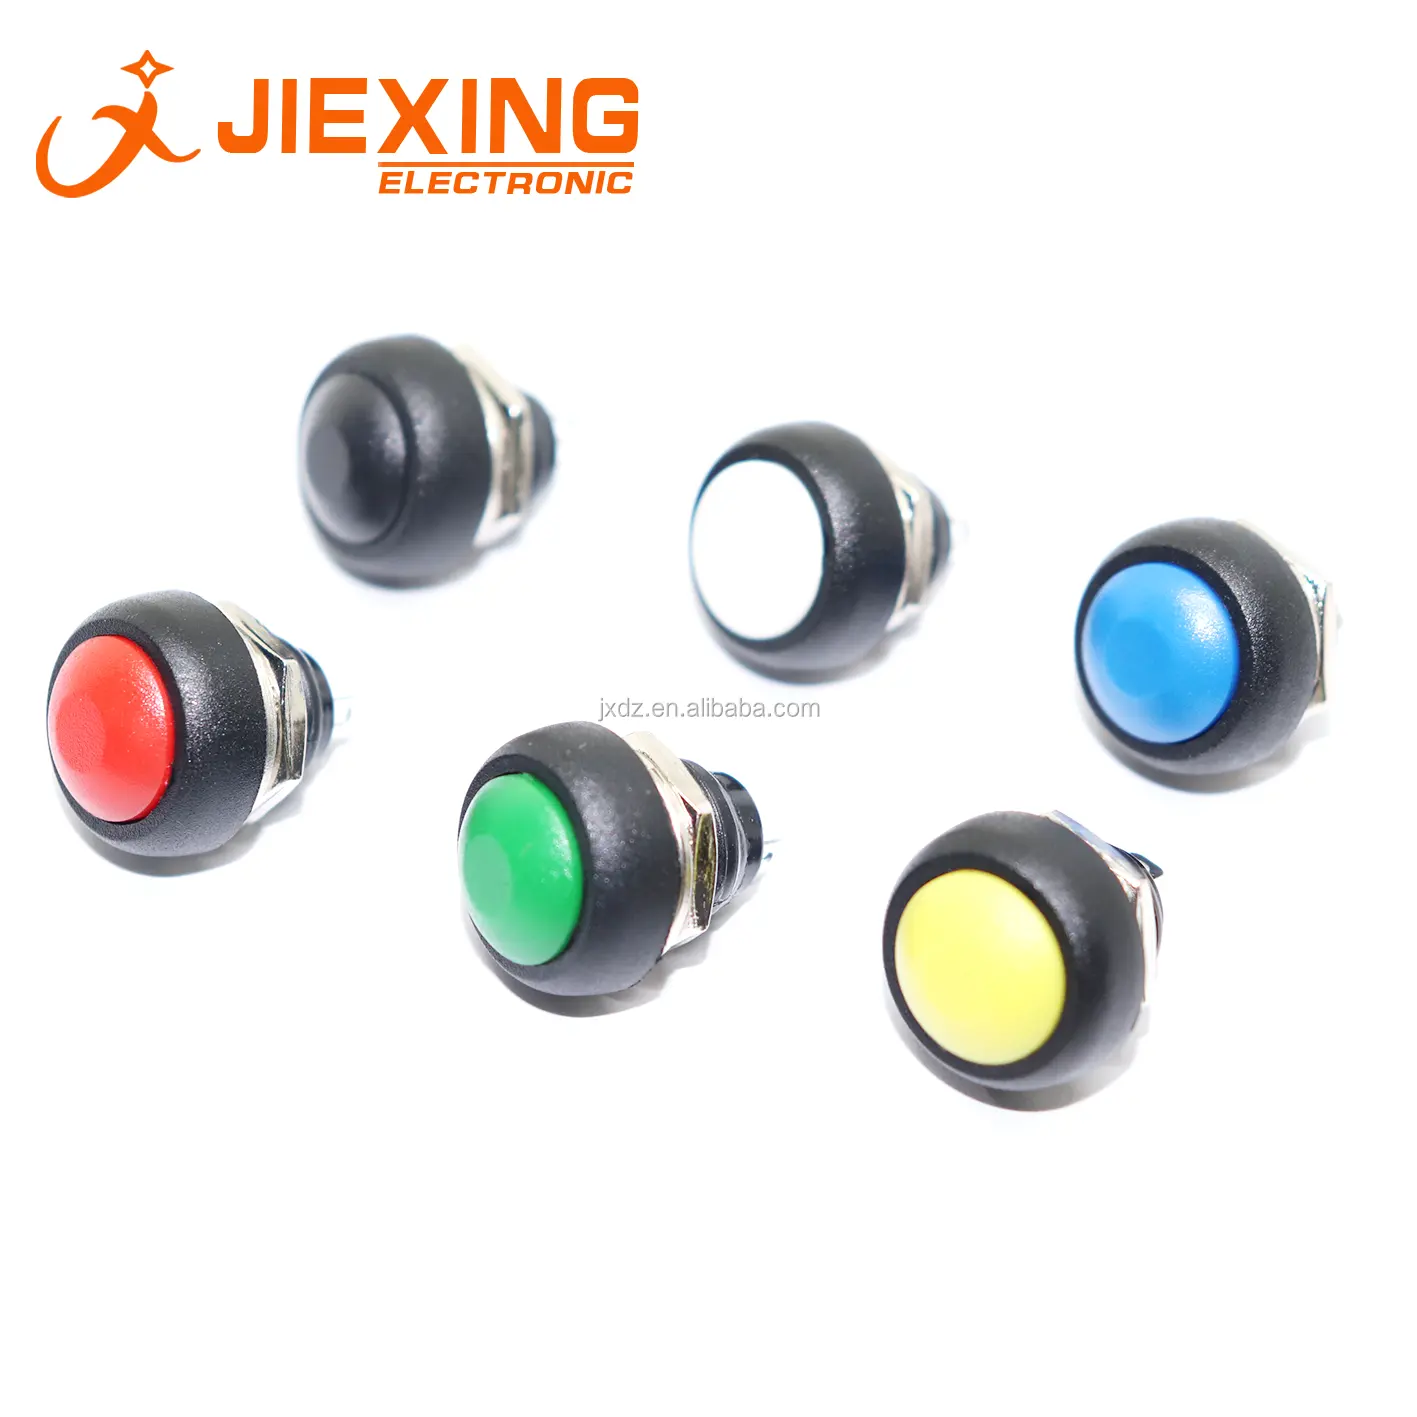 PBS-33B Push button switch 12mm Momentary Round switch 2pin Waterproof Red/Black/White/Yellow/Green/Blue